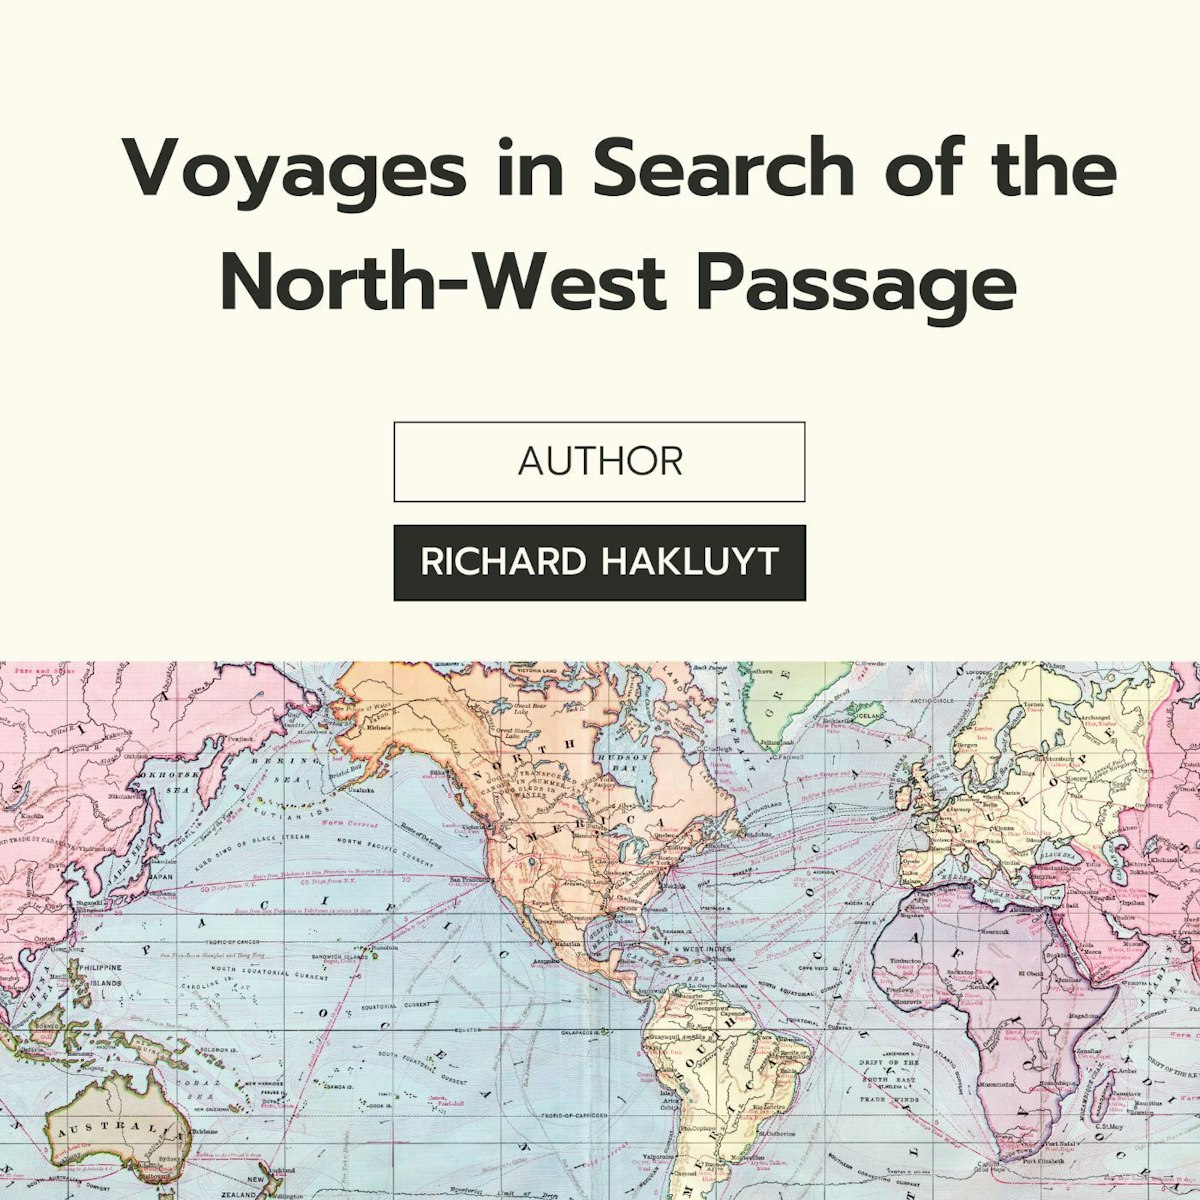 featured image - THE SECOND VOYAGE OF MASTER MARTIN FROBISHER